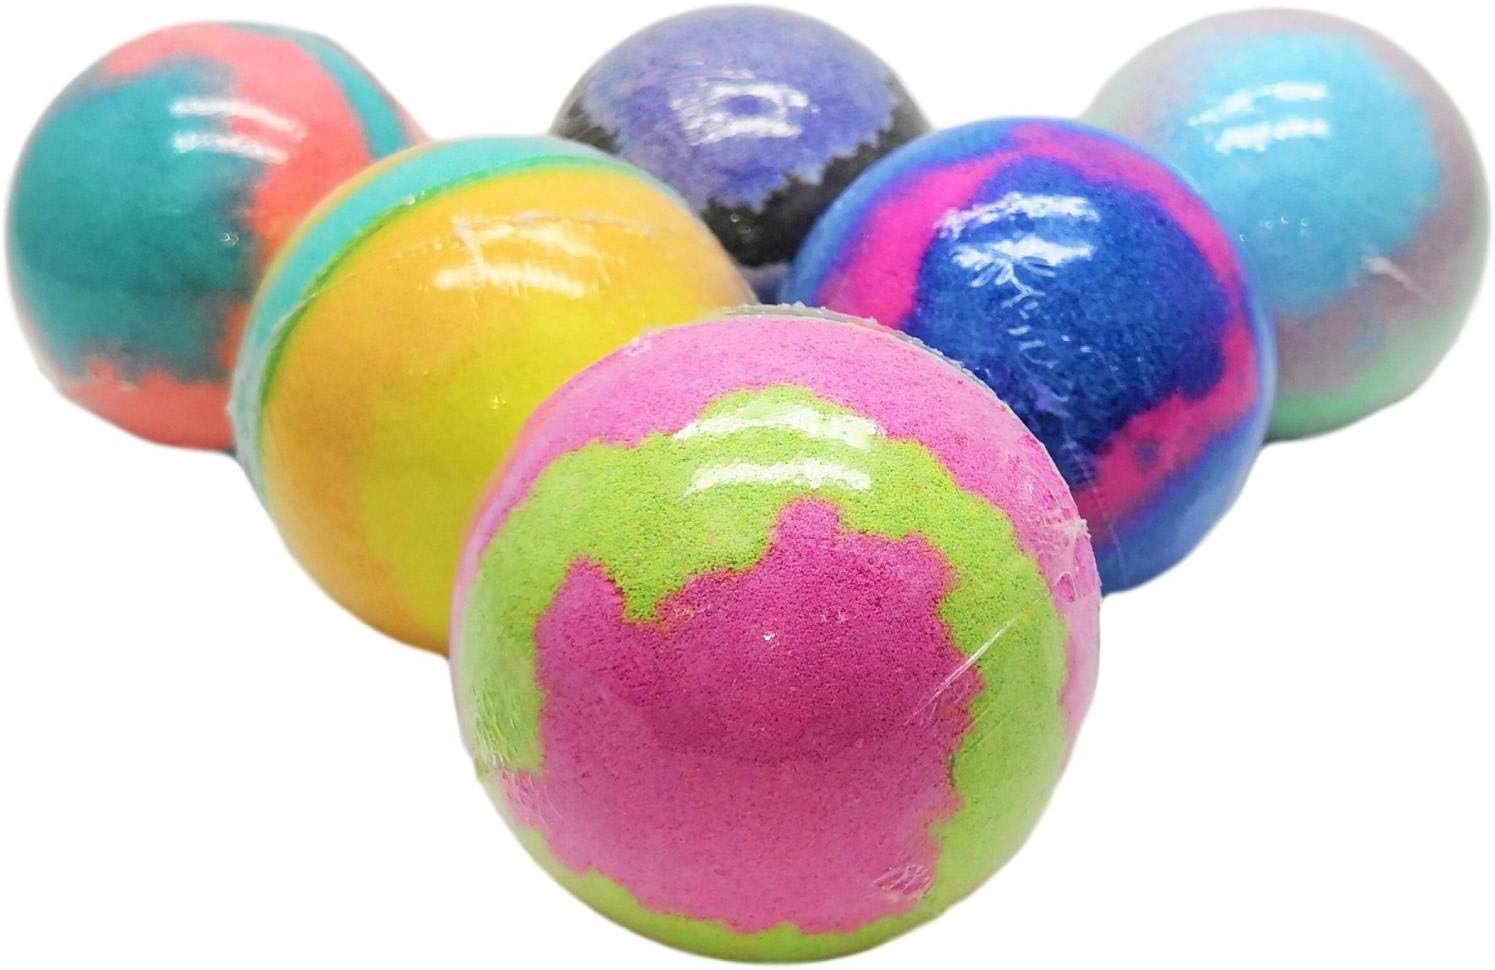 Kids Bath Bombs with a Surprise Toy inside & Fizz Fun Sets Colored XL Bath Bombs, Kid Safe, Gender Neutral